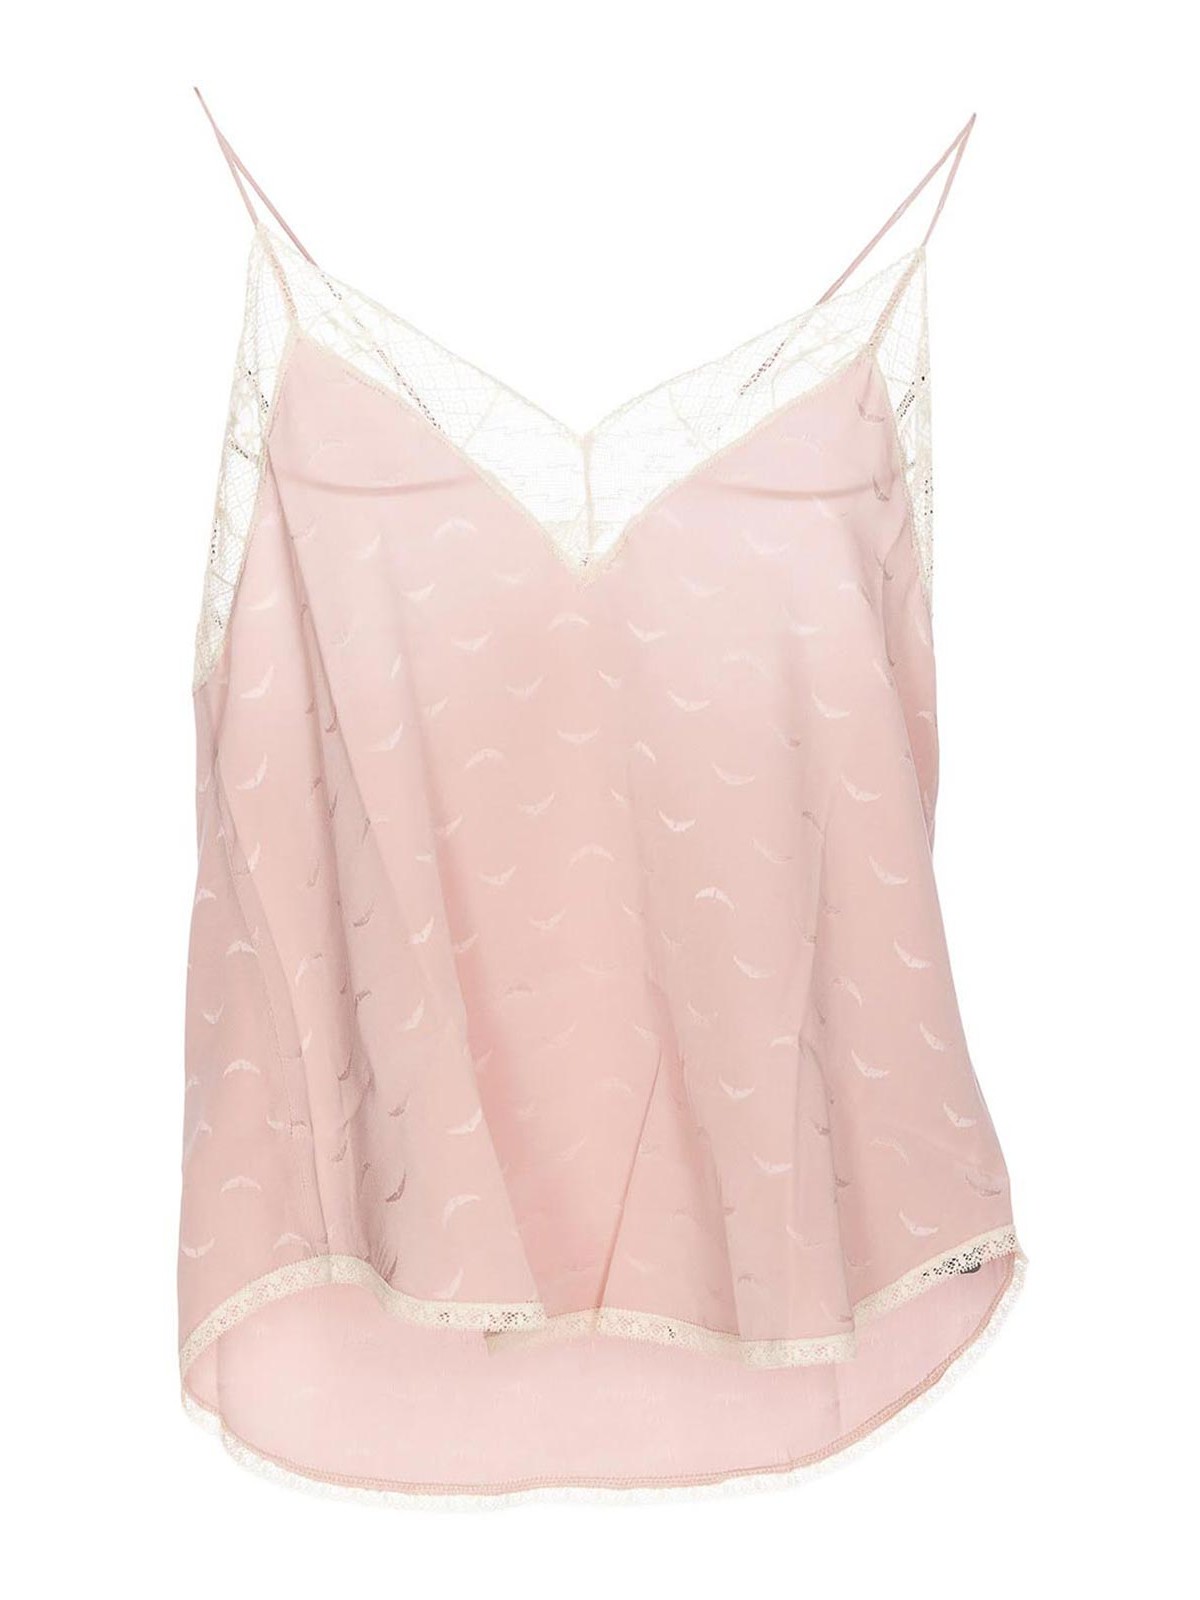 ZADIG & VOLTAIRE CHRISTY JAC WINGS TANK TOP